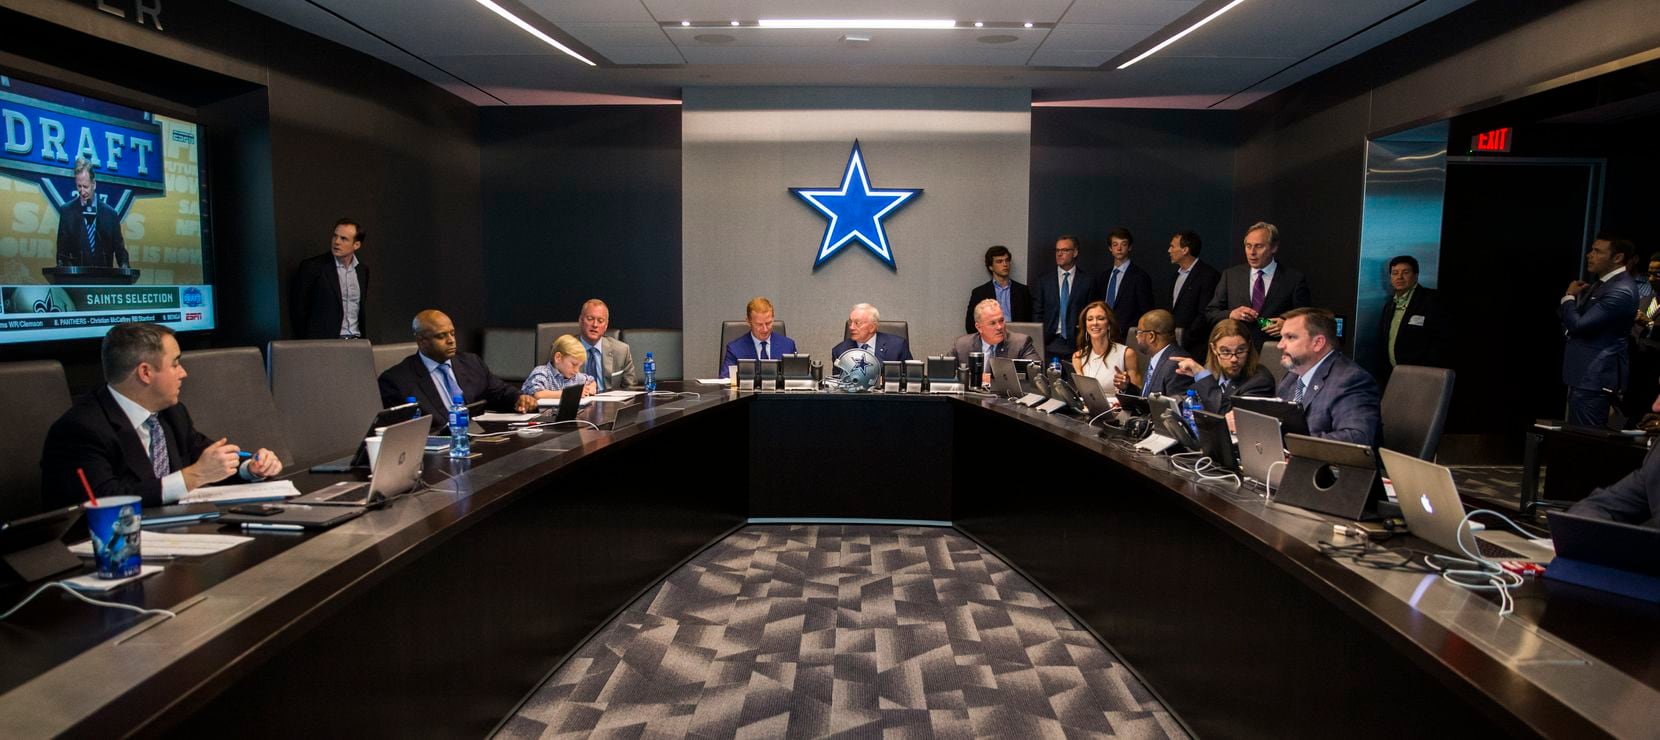 Dallas Cowboys head coach Jason Garrett, team owner Jerry Jones, executive vice president and CEO Stephen Jones, executive vice president and chief brand officer Charlotte Jones Anderson and other executives discuss players in the war room during round one of the 2017 NFL Draft on Thursday, April 27, 2017, at The Star in Frisco. 